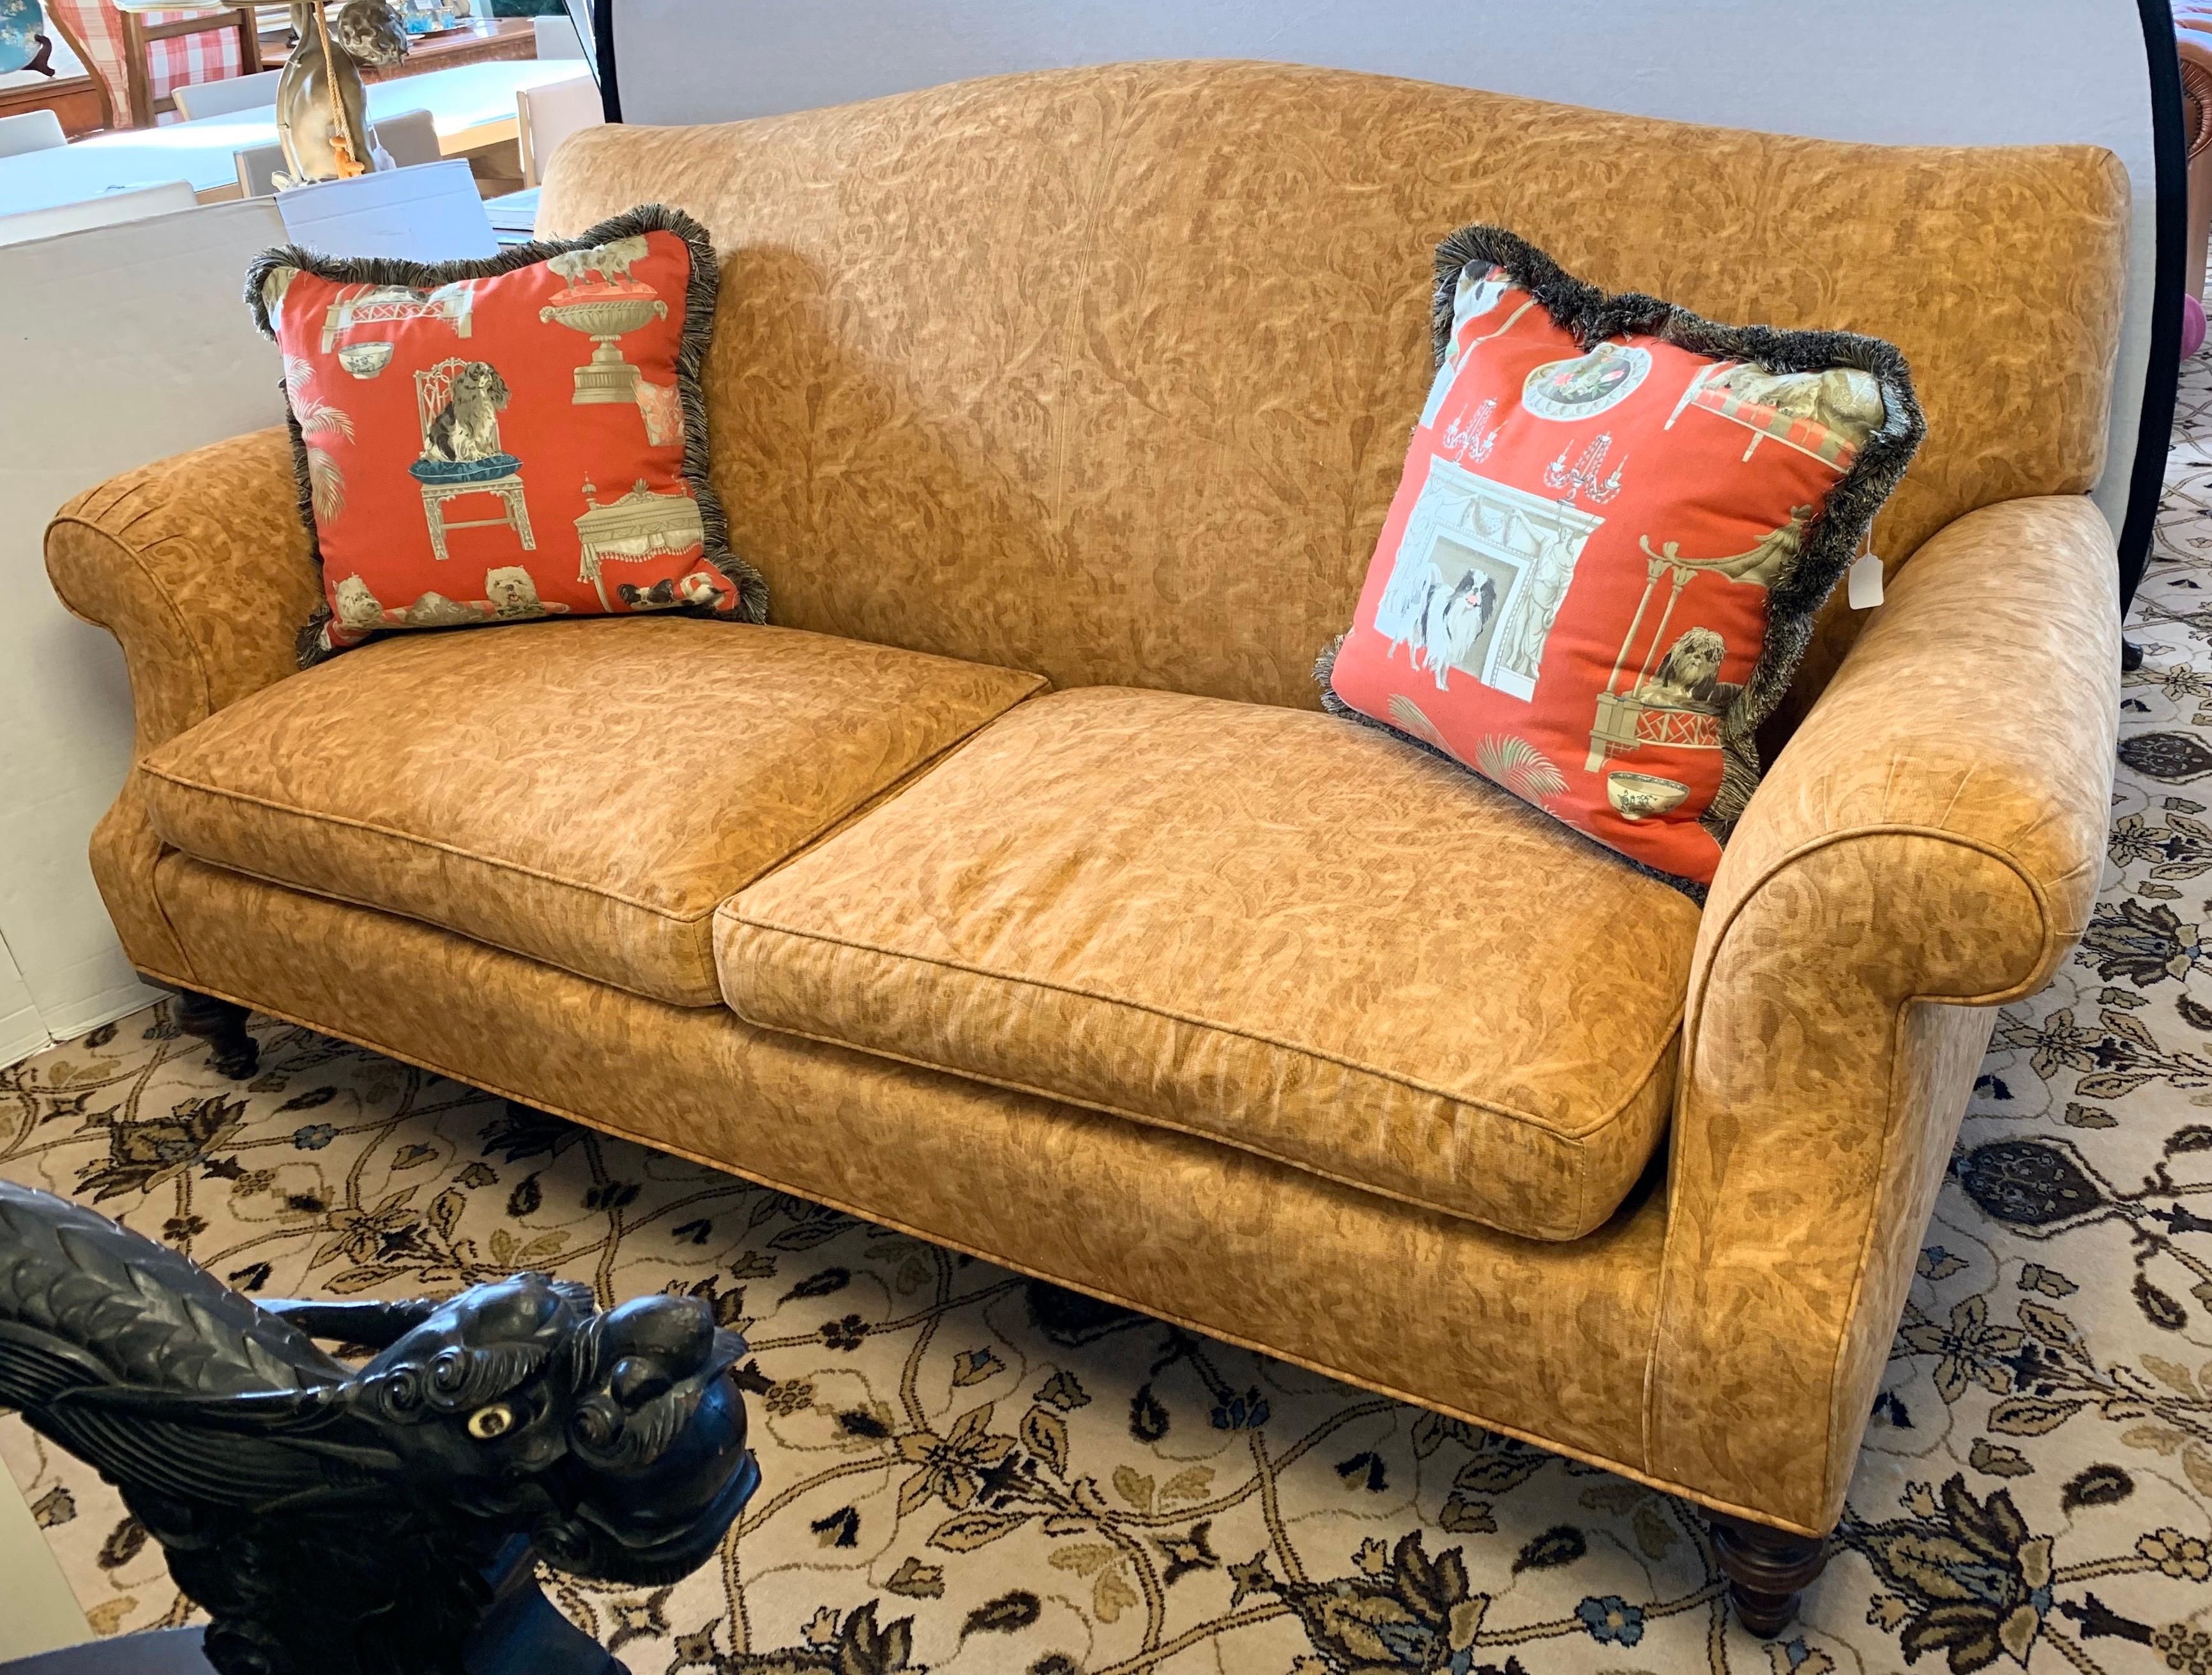 Elegant seven foot B&F signed sofa featuring down cushions and eight-way hand tied construction.
Comes with lovely bespoke chinoiserie throw pillows as shown.